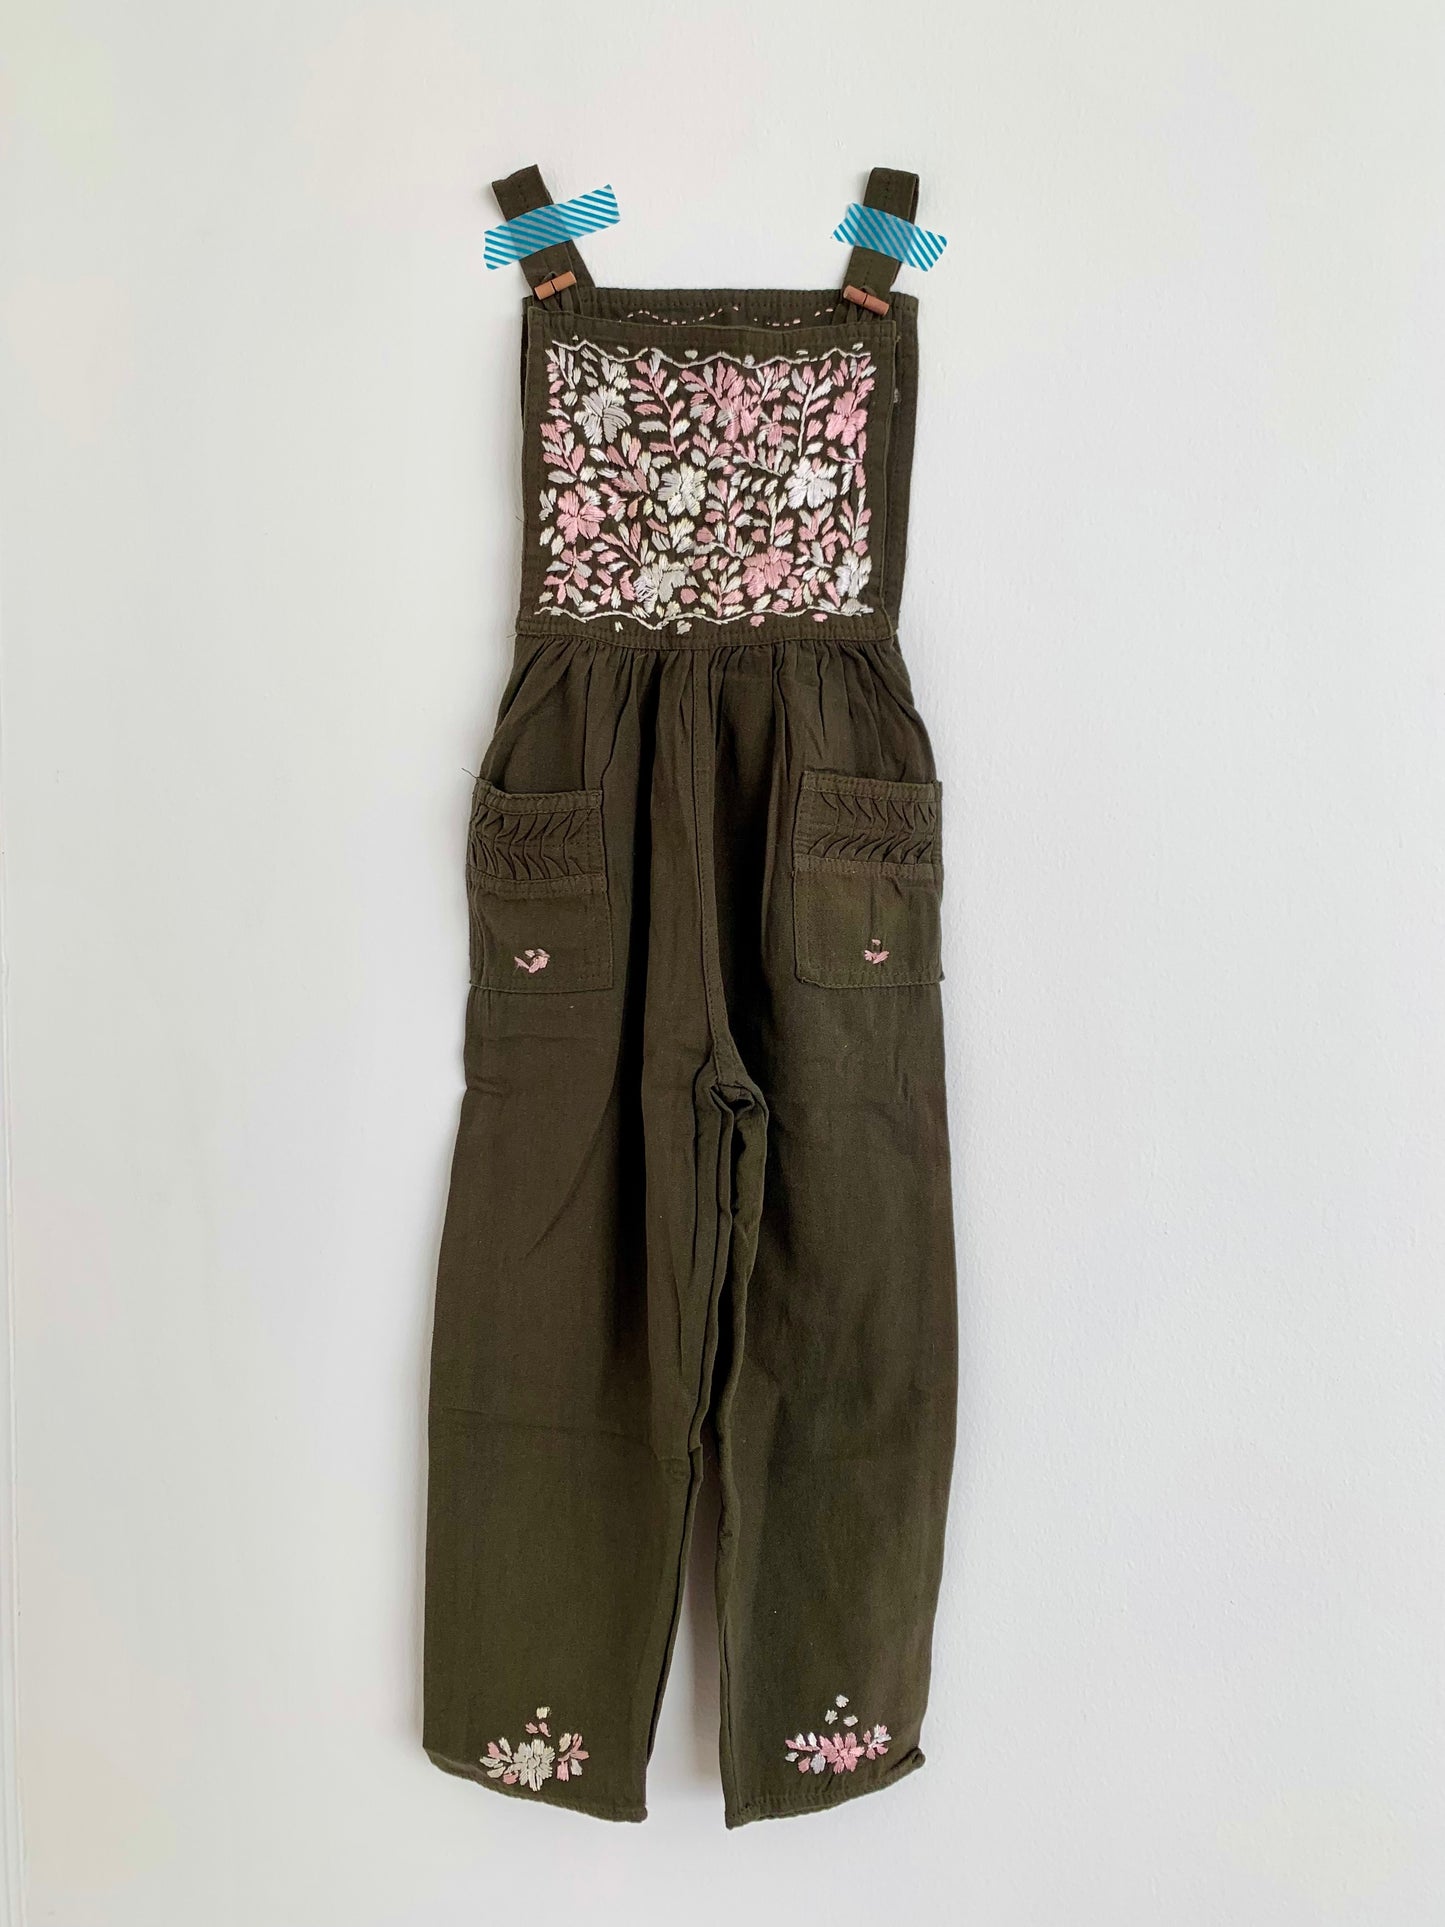 Hand embroidered overalls